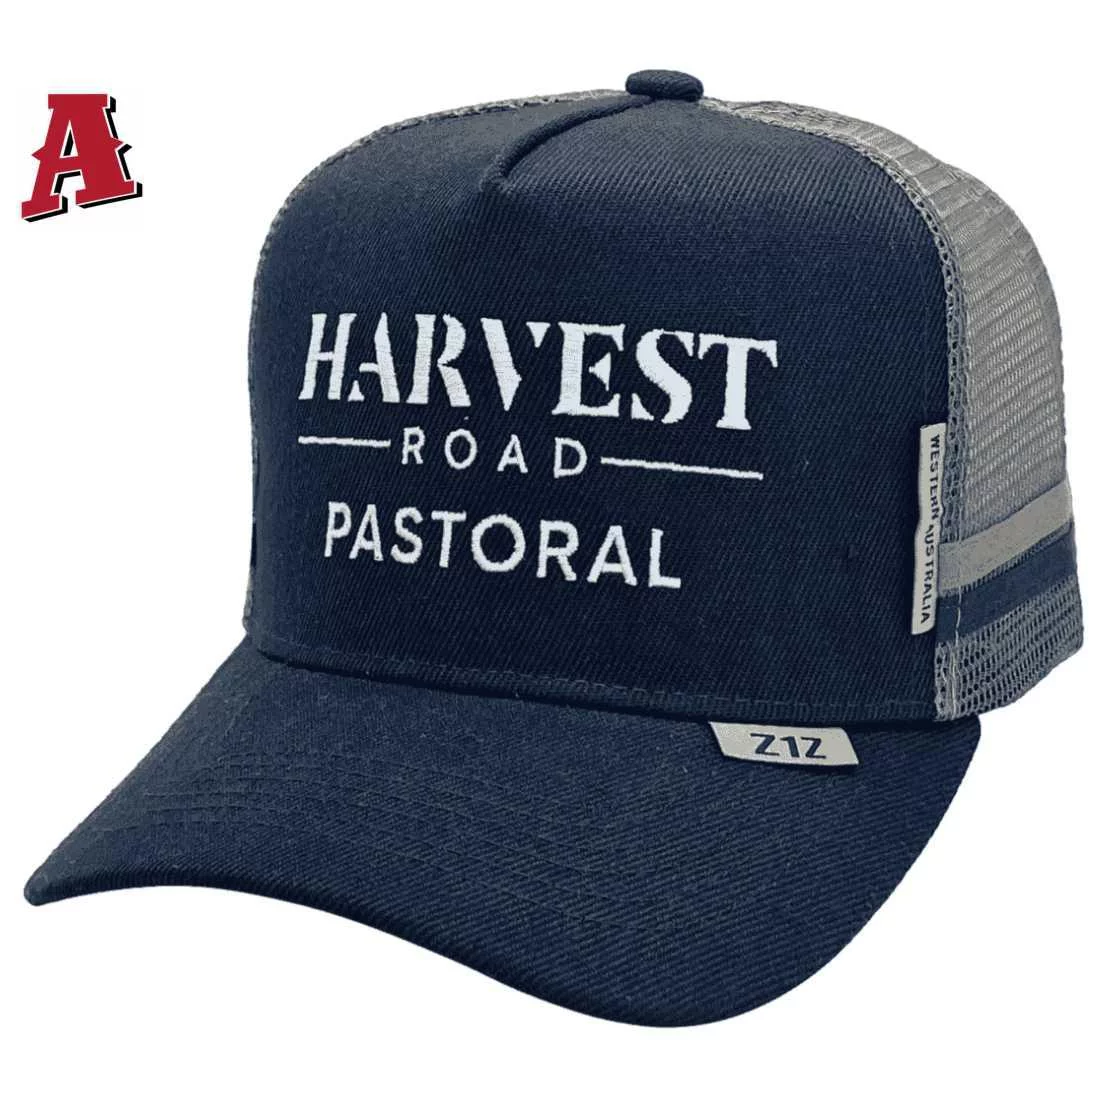 Harvest Road Beef Perth WA HP Midrange Aussie Trucker Hats with Australian Head Fit Crown and 2 Side Bands Navy Grey Brown